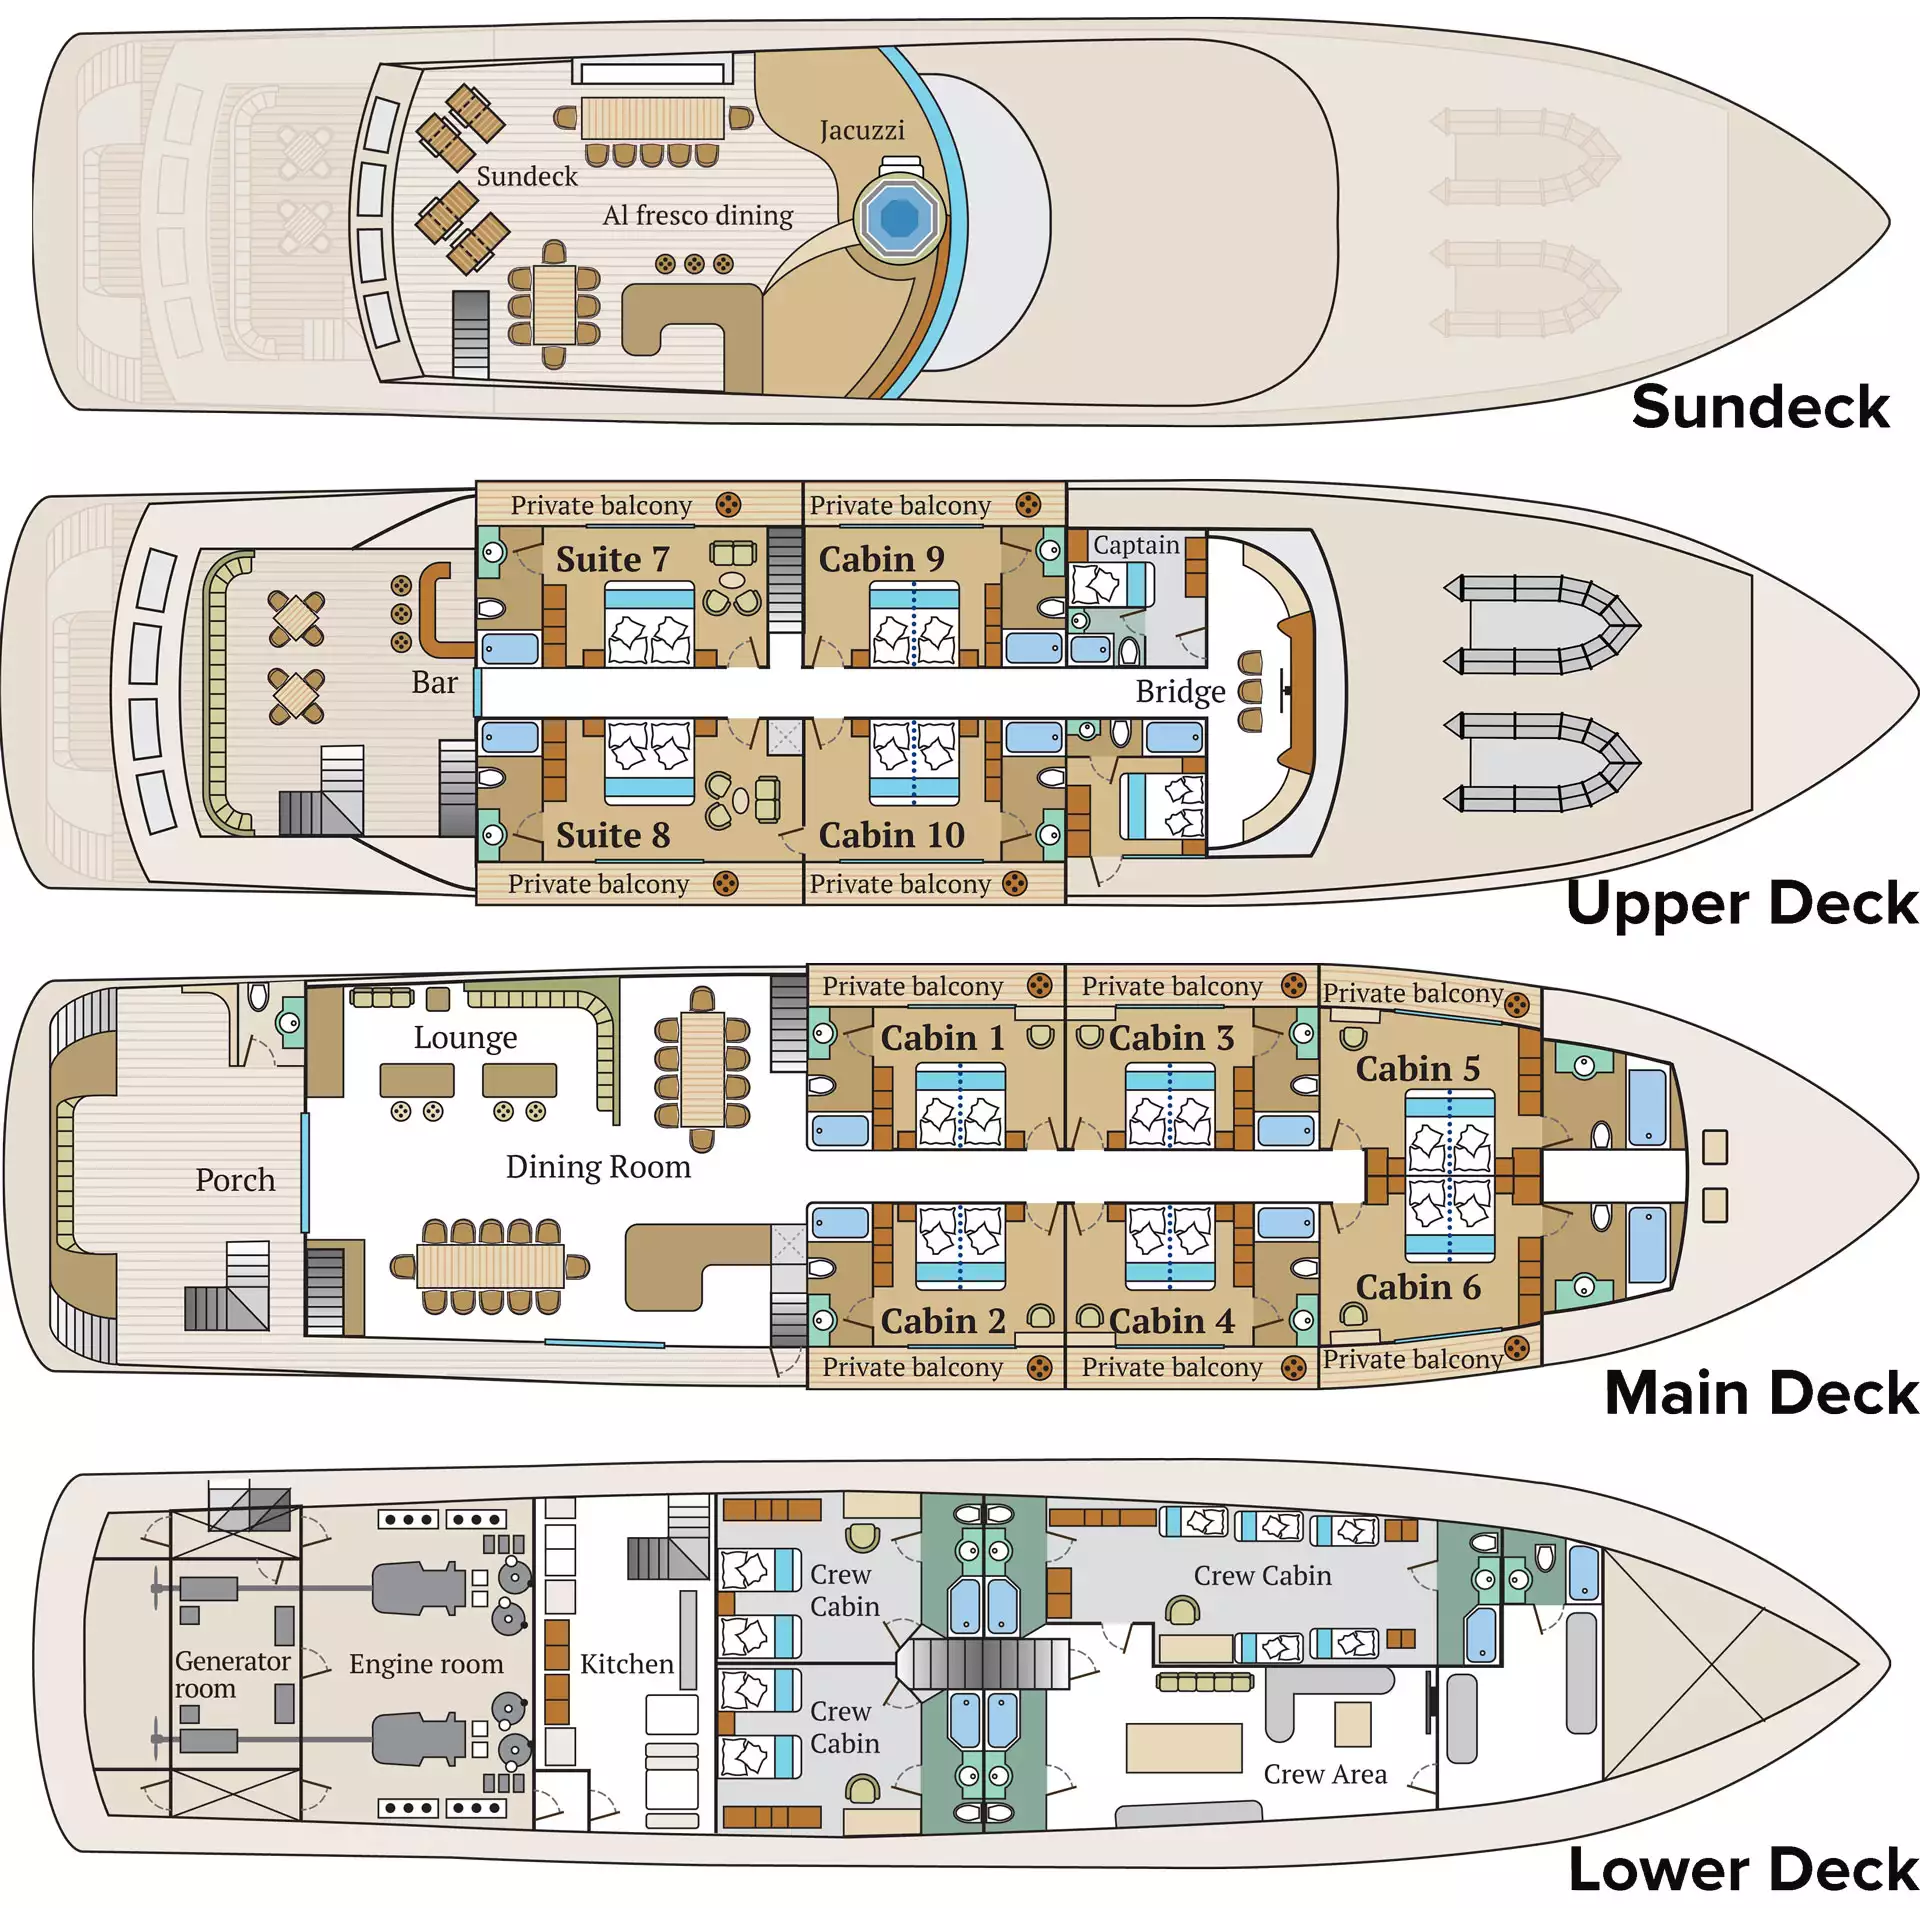 Deck plan of Infinity cruise ship in Galapagos with 4 passenger decks, 10 guest cabins, Dining Room, Outdoor aft bar & Jacuzzi.